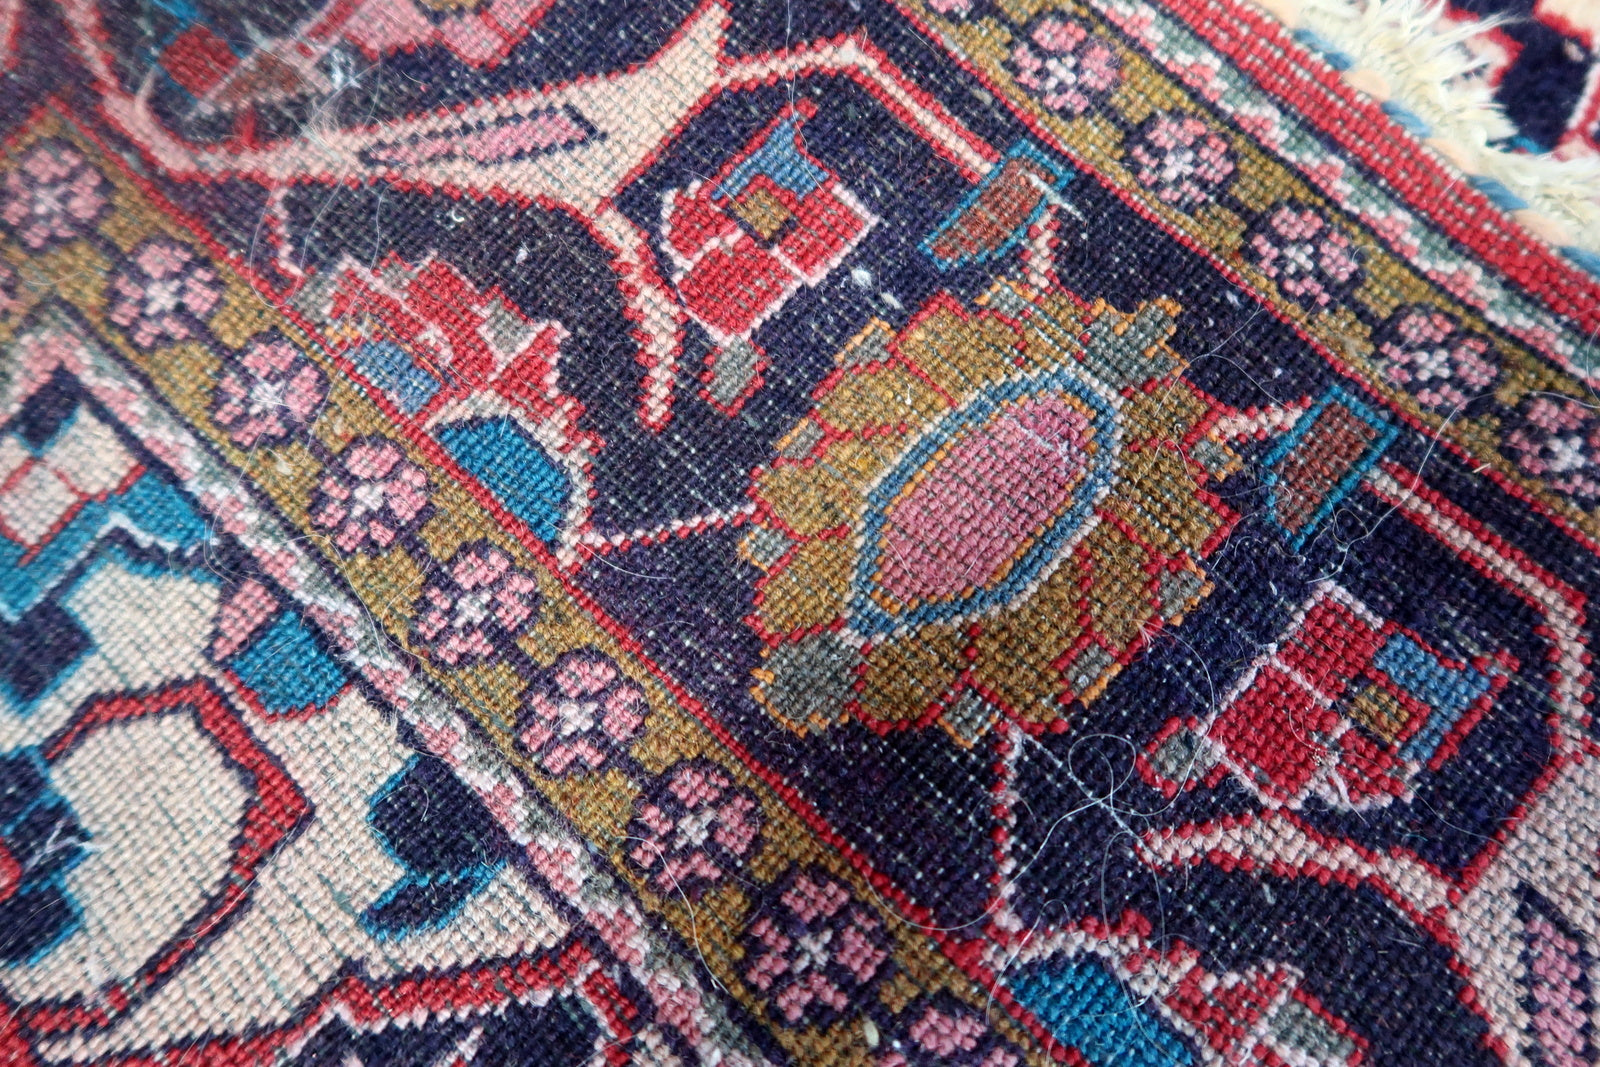 Back view of the vintage Persian Kashan rug highlighting its craftsmanship and size